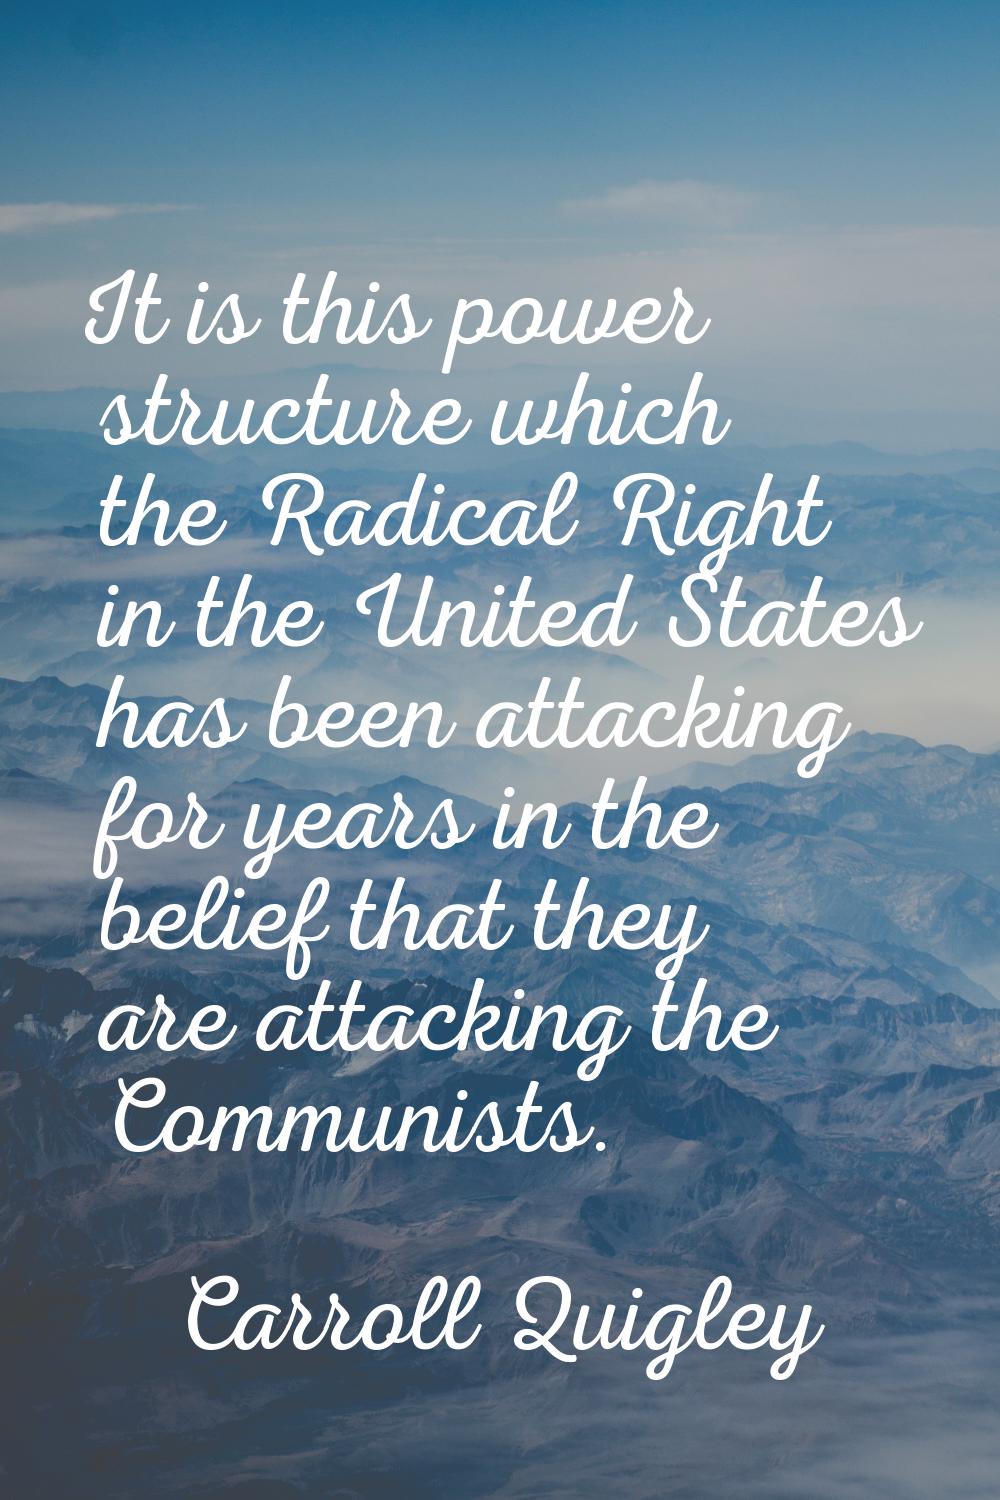 It is this power structure which the Radical Right in the United States has been attacking for year